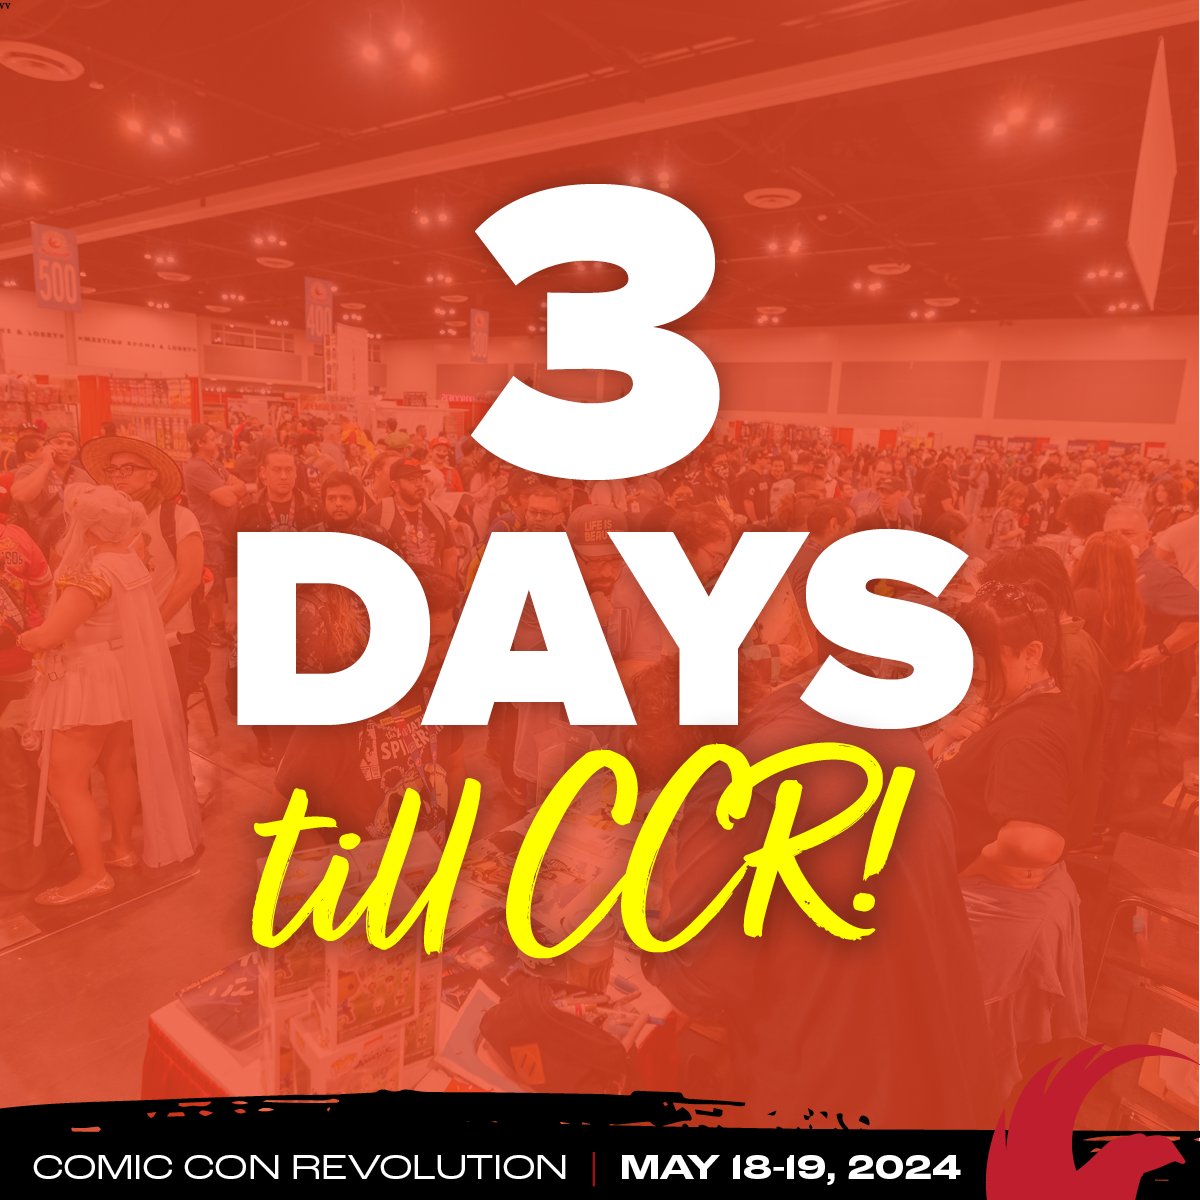 3️⃣ ONLY 3 MORE DAYS til #ComicConRevolution takes over The Ontario Convention Center May 18 & 19 w/ a weekend full of special guests, comic book stars, cosplay, interactive & entertaining programming + more! Tix: CCRTix.com #comiccon #inlandempire #ontariocalifornia